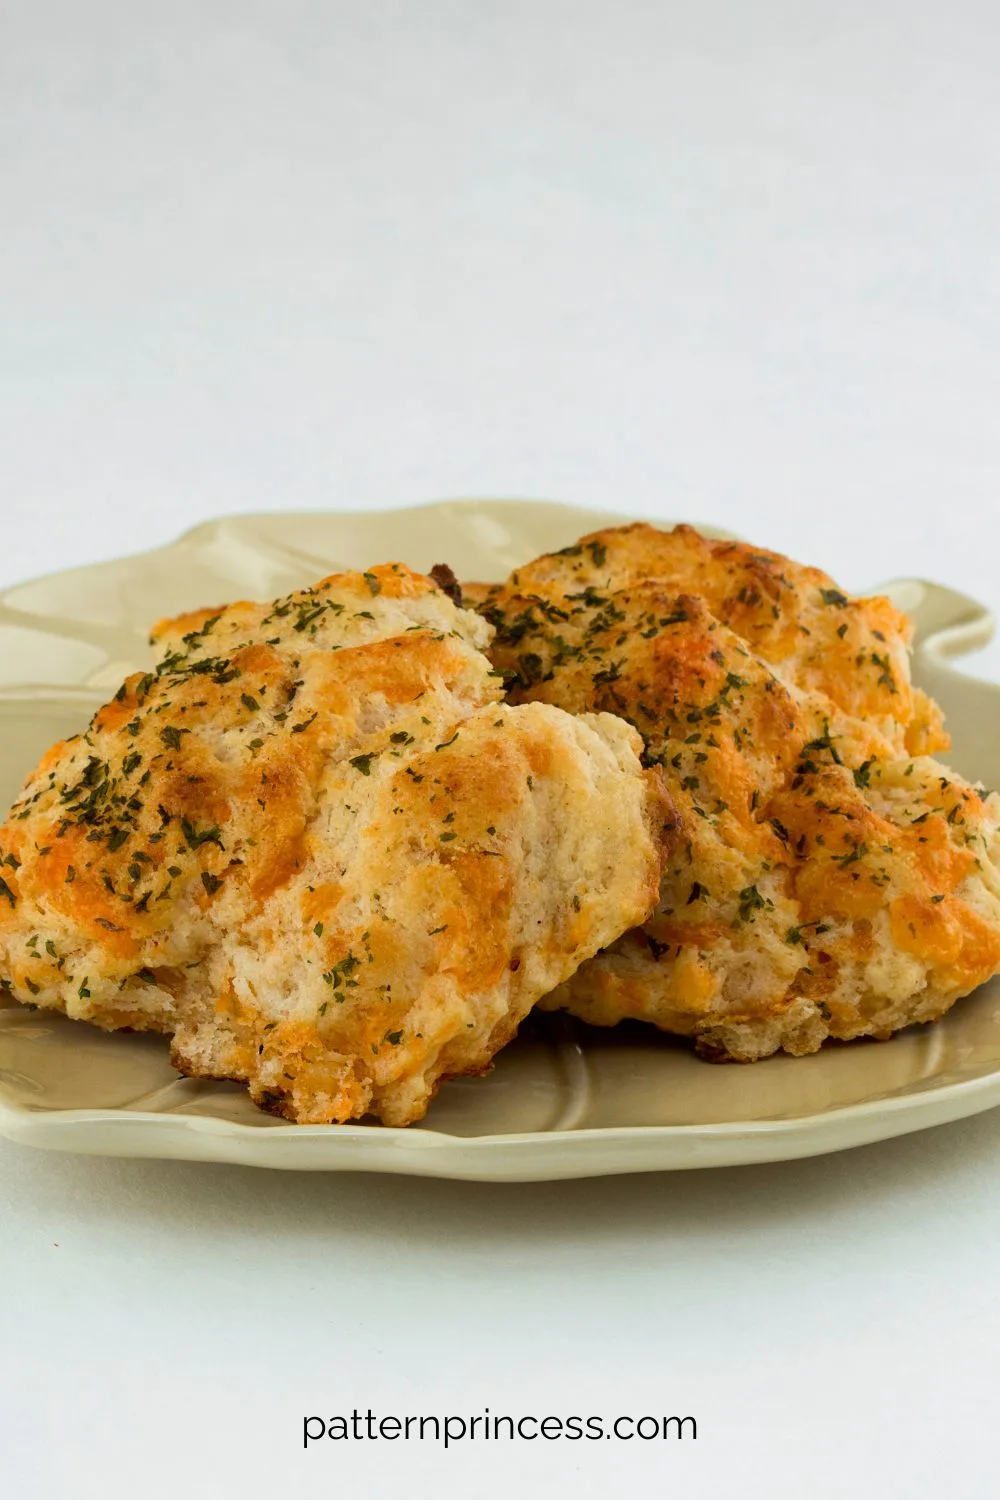 Cheddar Biscuits from Homemade Mix